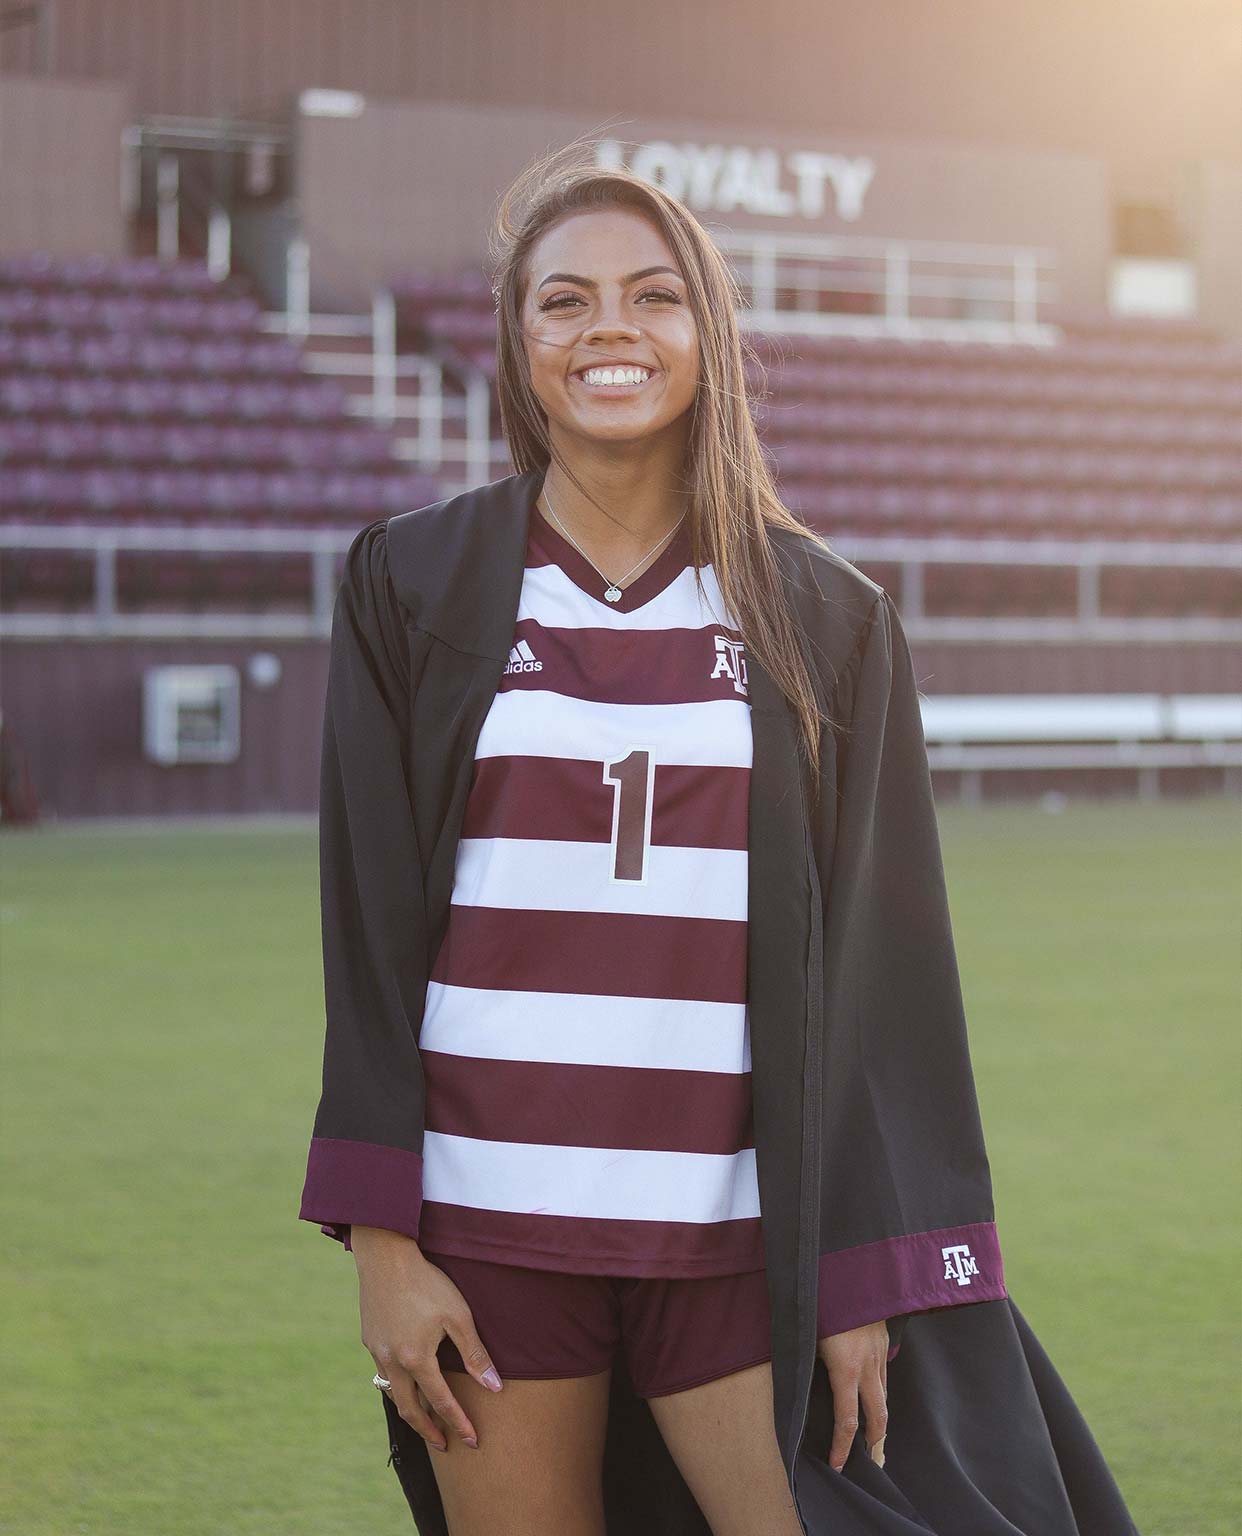 Ally Watt in her graduation gown and soccer uniform posing on the field